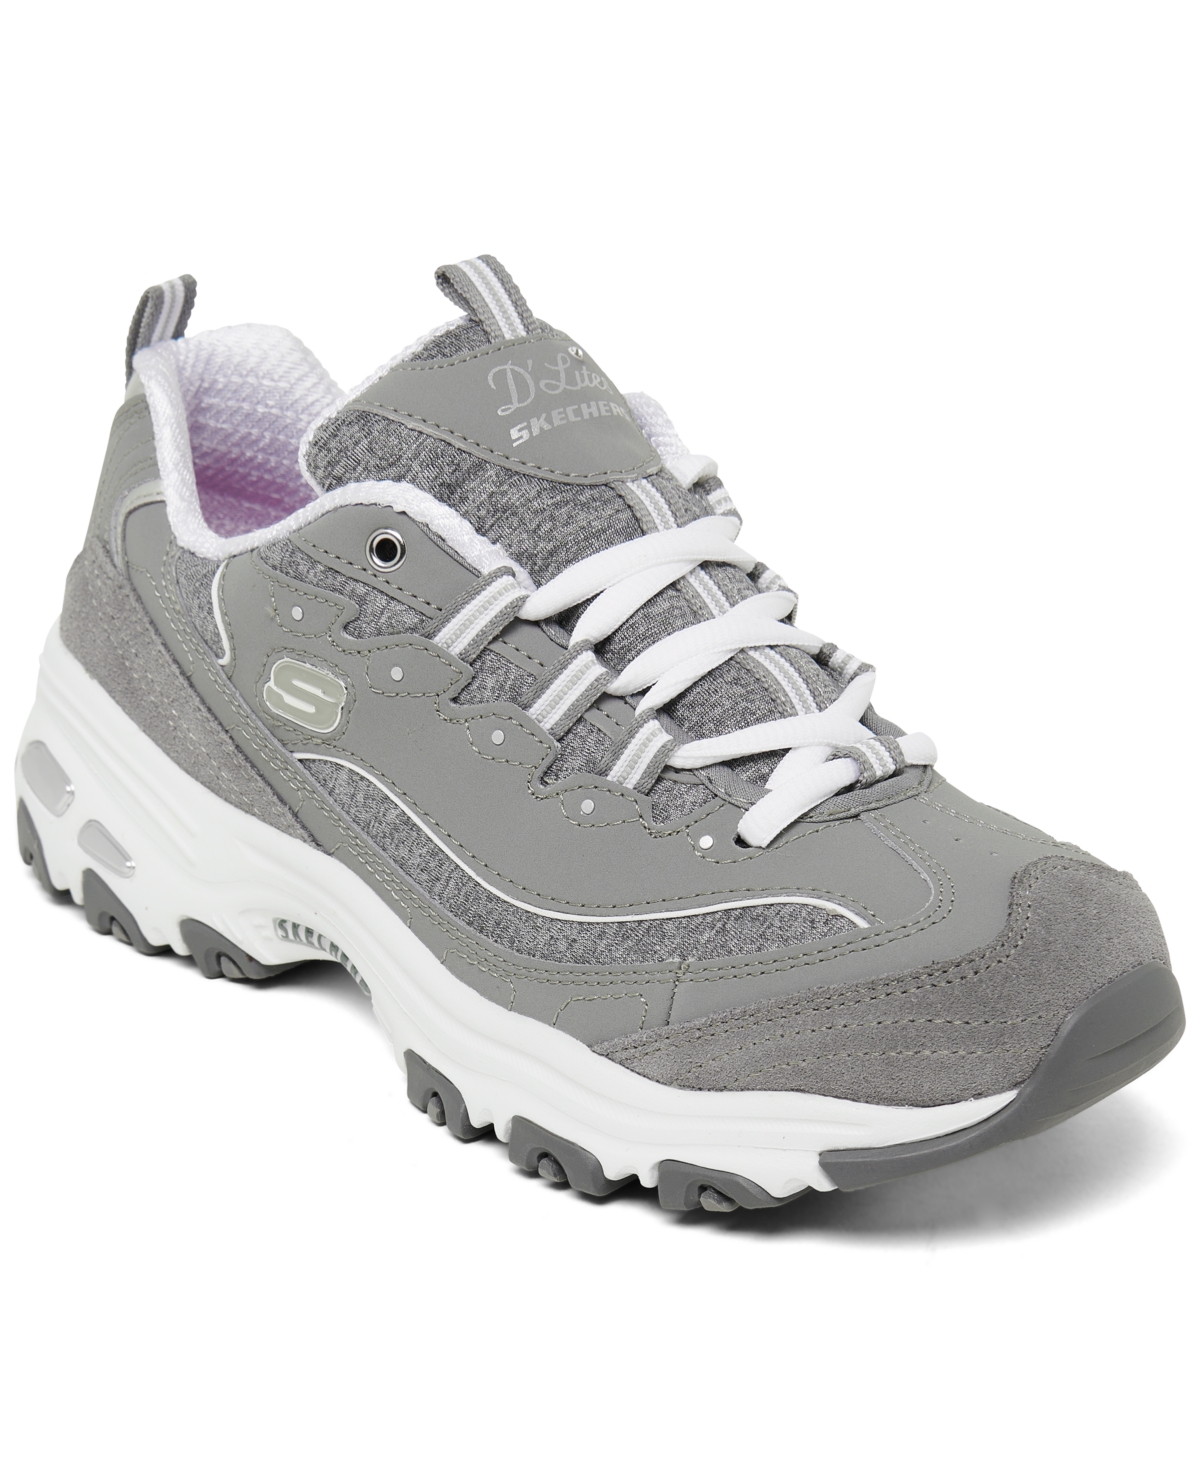 Women's D'Lites - Me Time Walking Sneakers from Finish Line - Grey/White